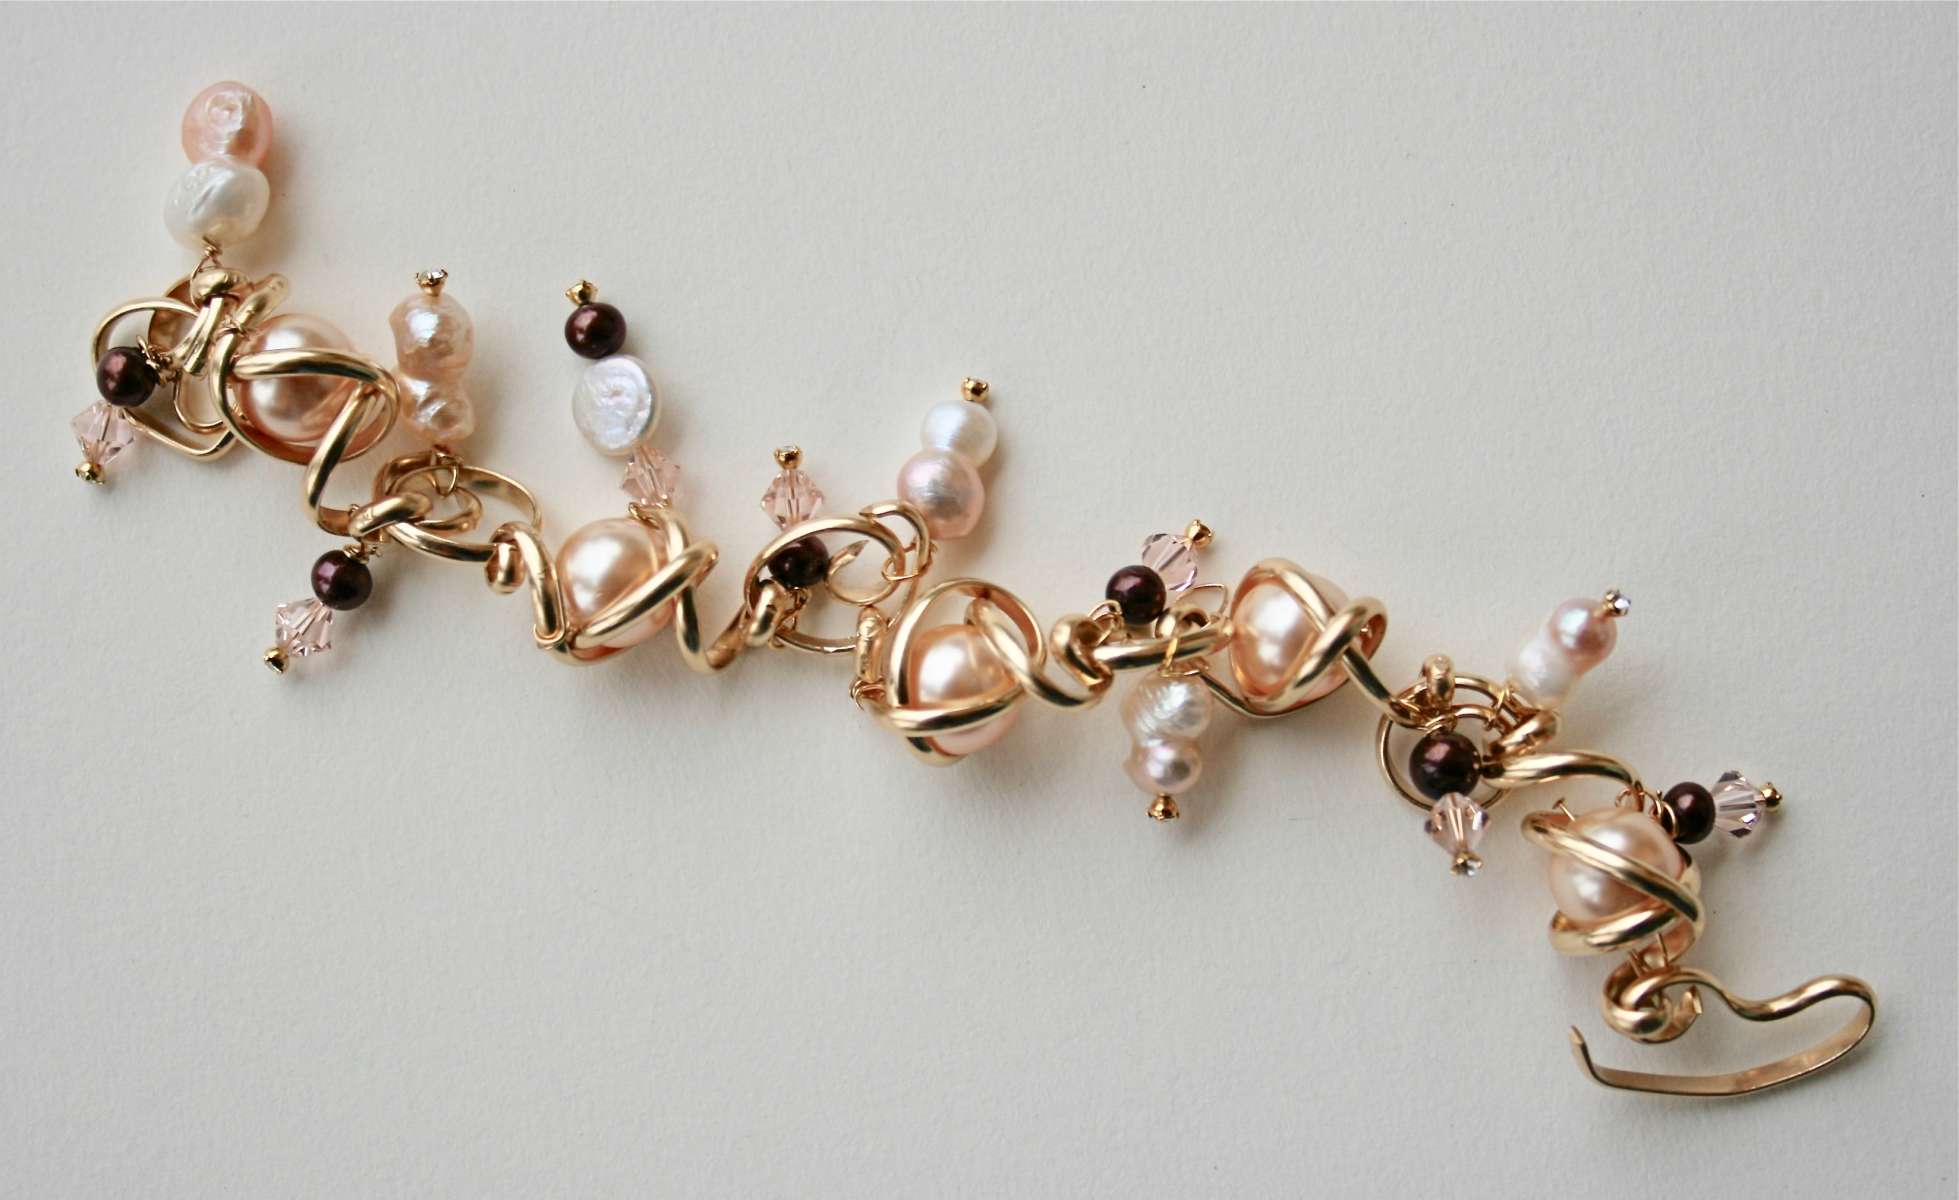 Twists and turns charm bracelet, Gold-filled